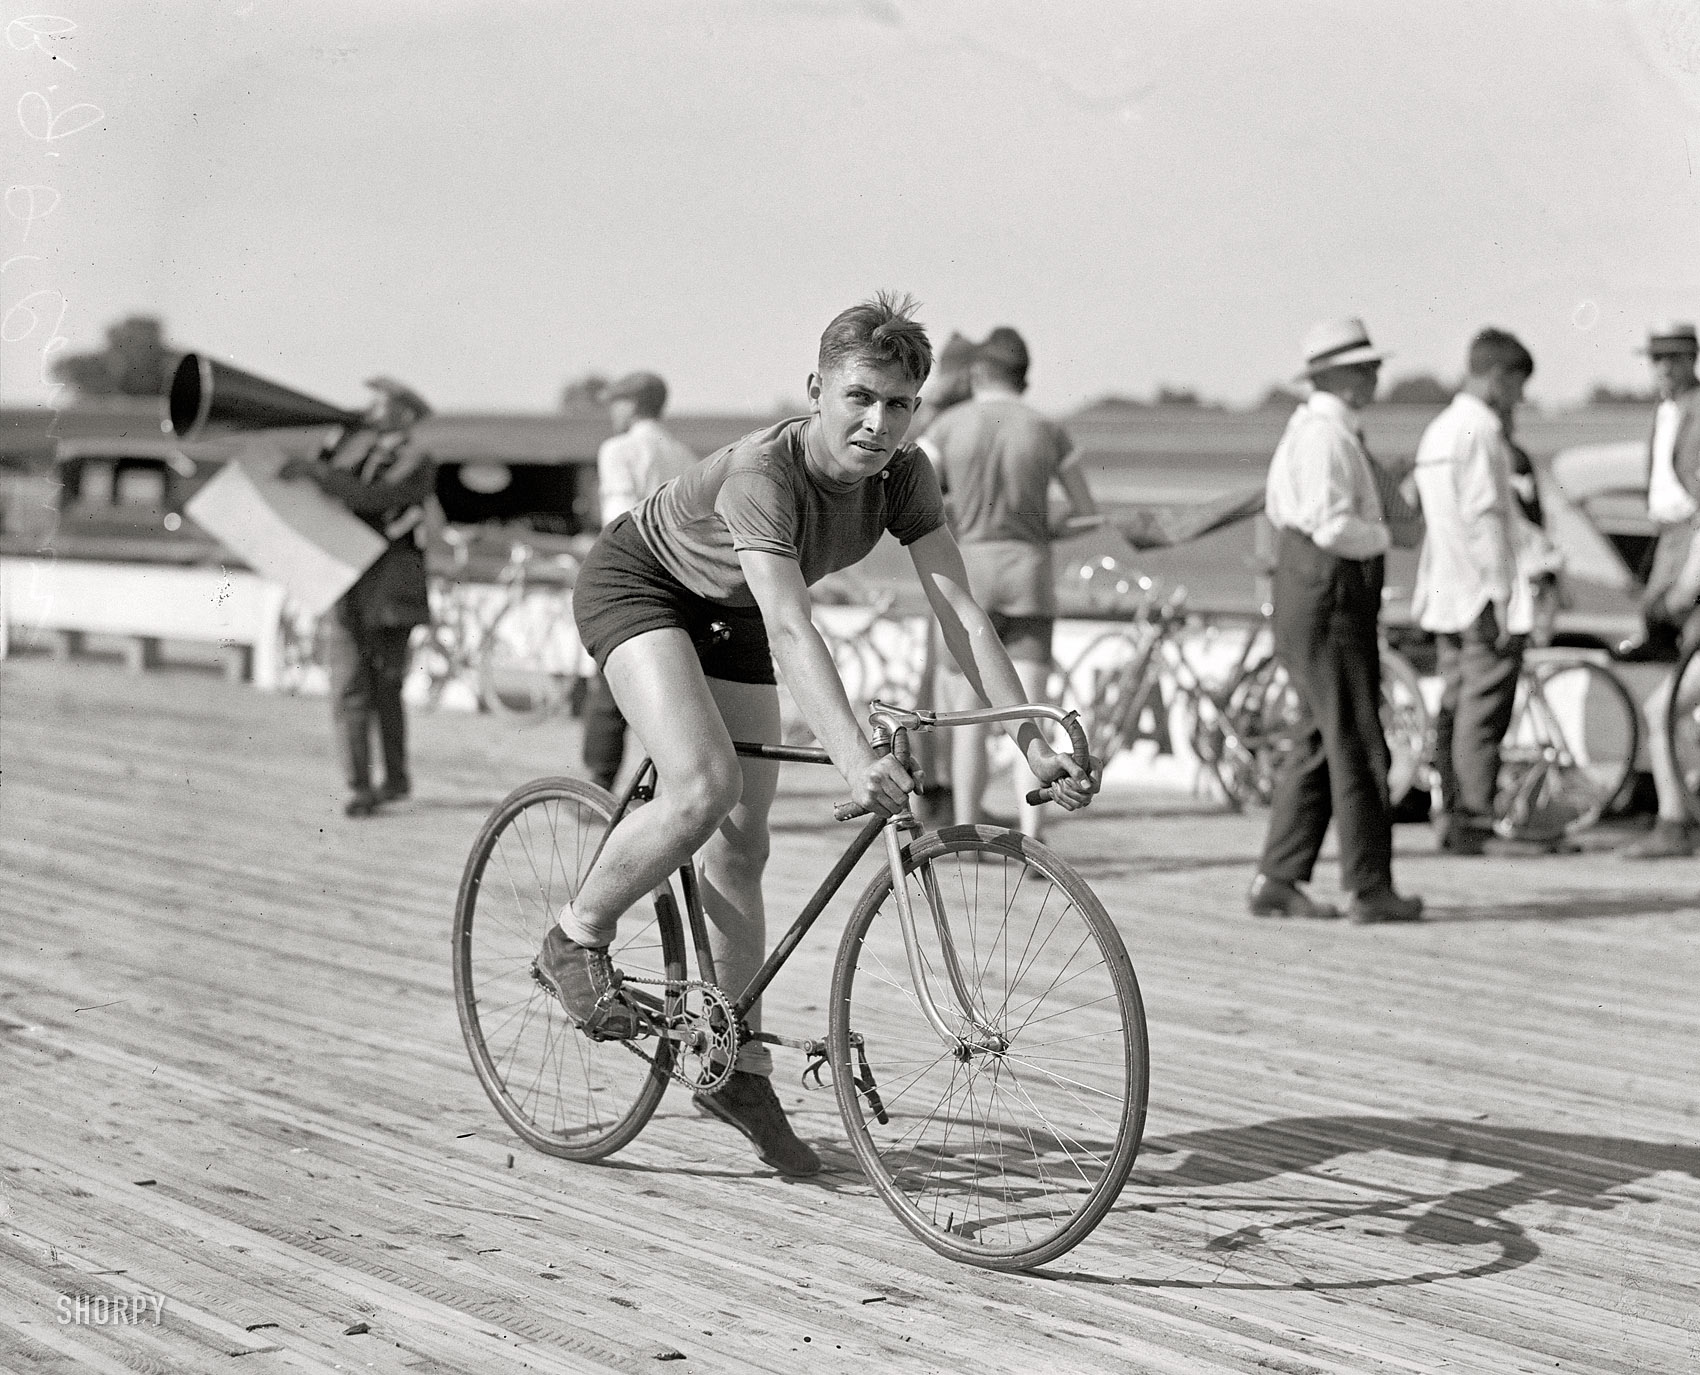 July 18, 1925. Laurel, Maryland. "R.J. O'Connor, inter-city championship bicycle races, Laurel Speedway." National Photo Co. glass negative. View full size.